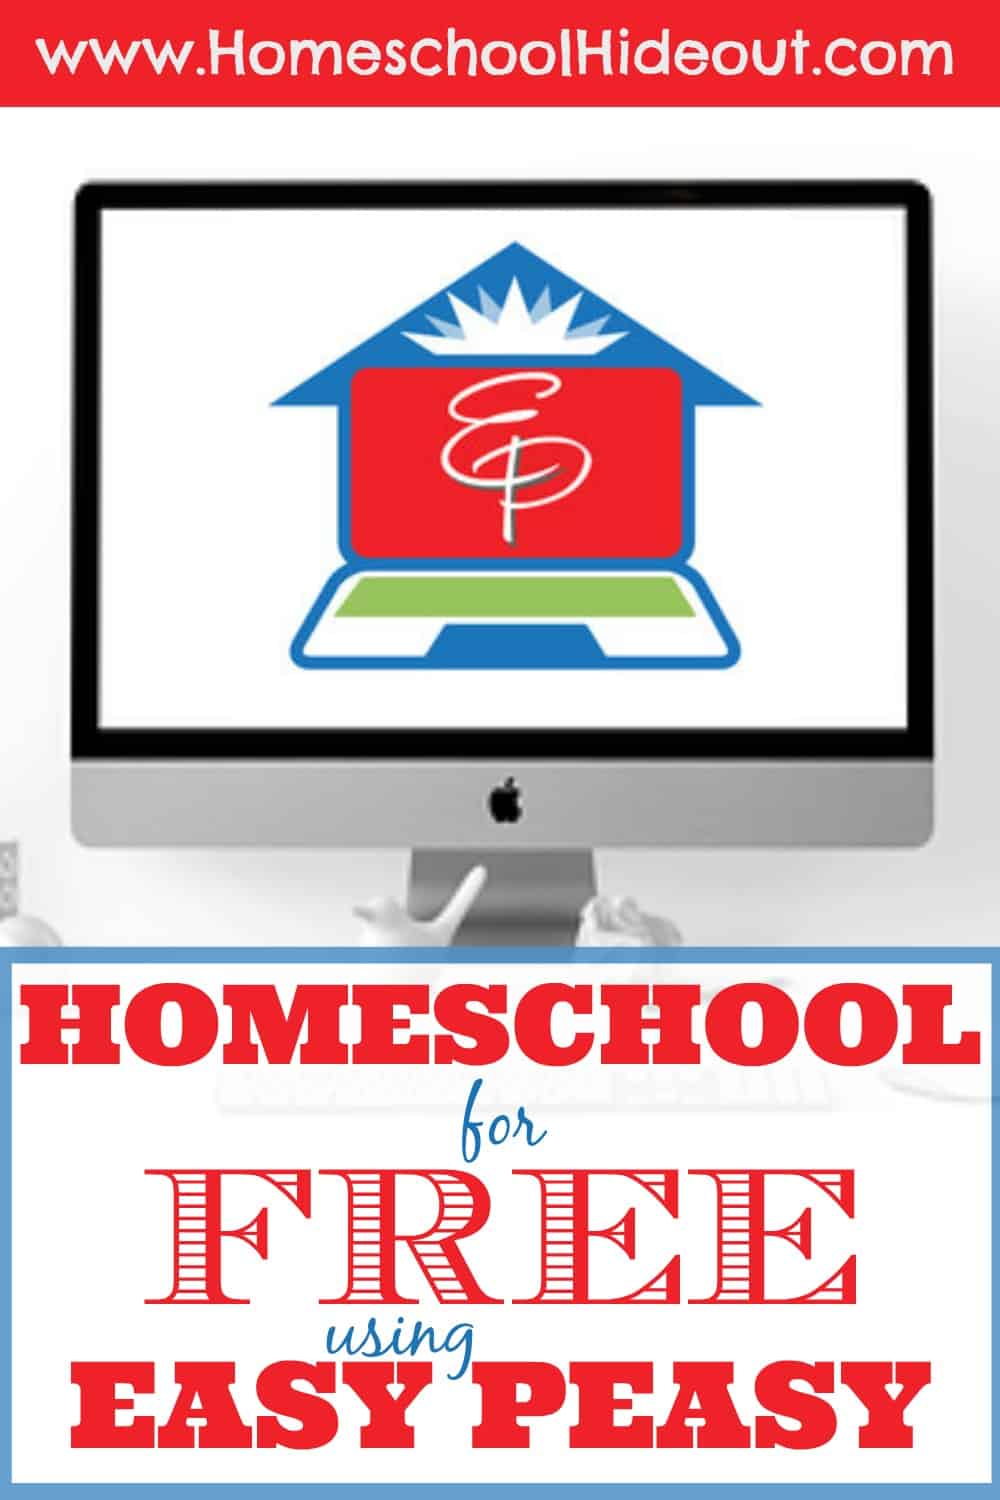 I wish I had known this sooner! I can actually homeschool for FREE using Easy Peasy! How awesome!!!